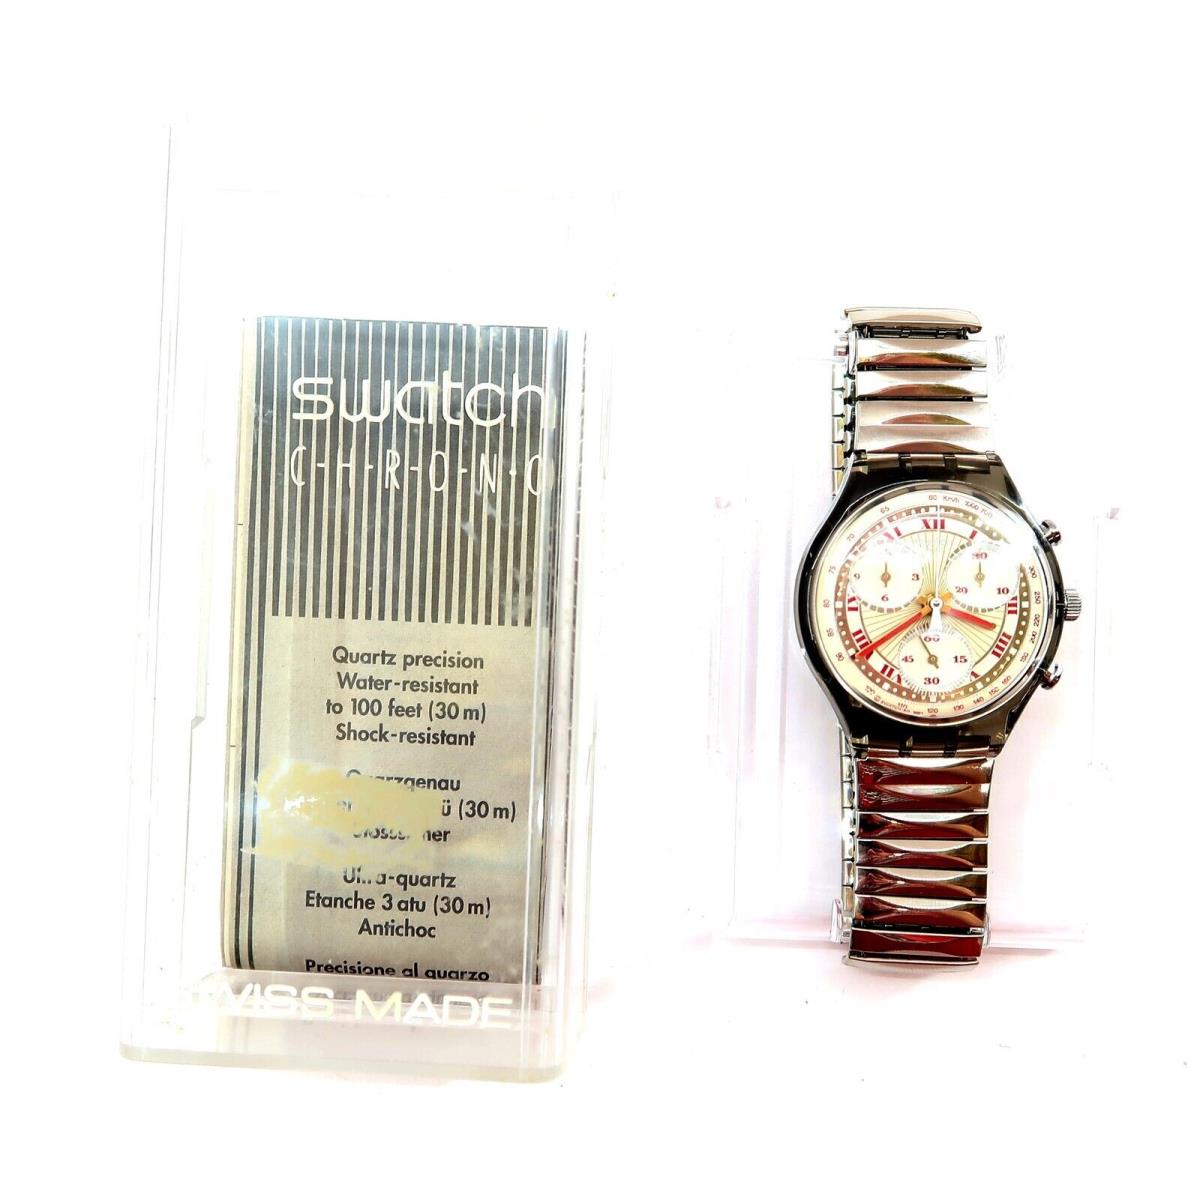 Swatch Chrono Watch Pleasure Dome SCM106 / 107 Mid Size Case and Papers 1994